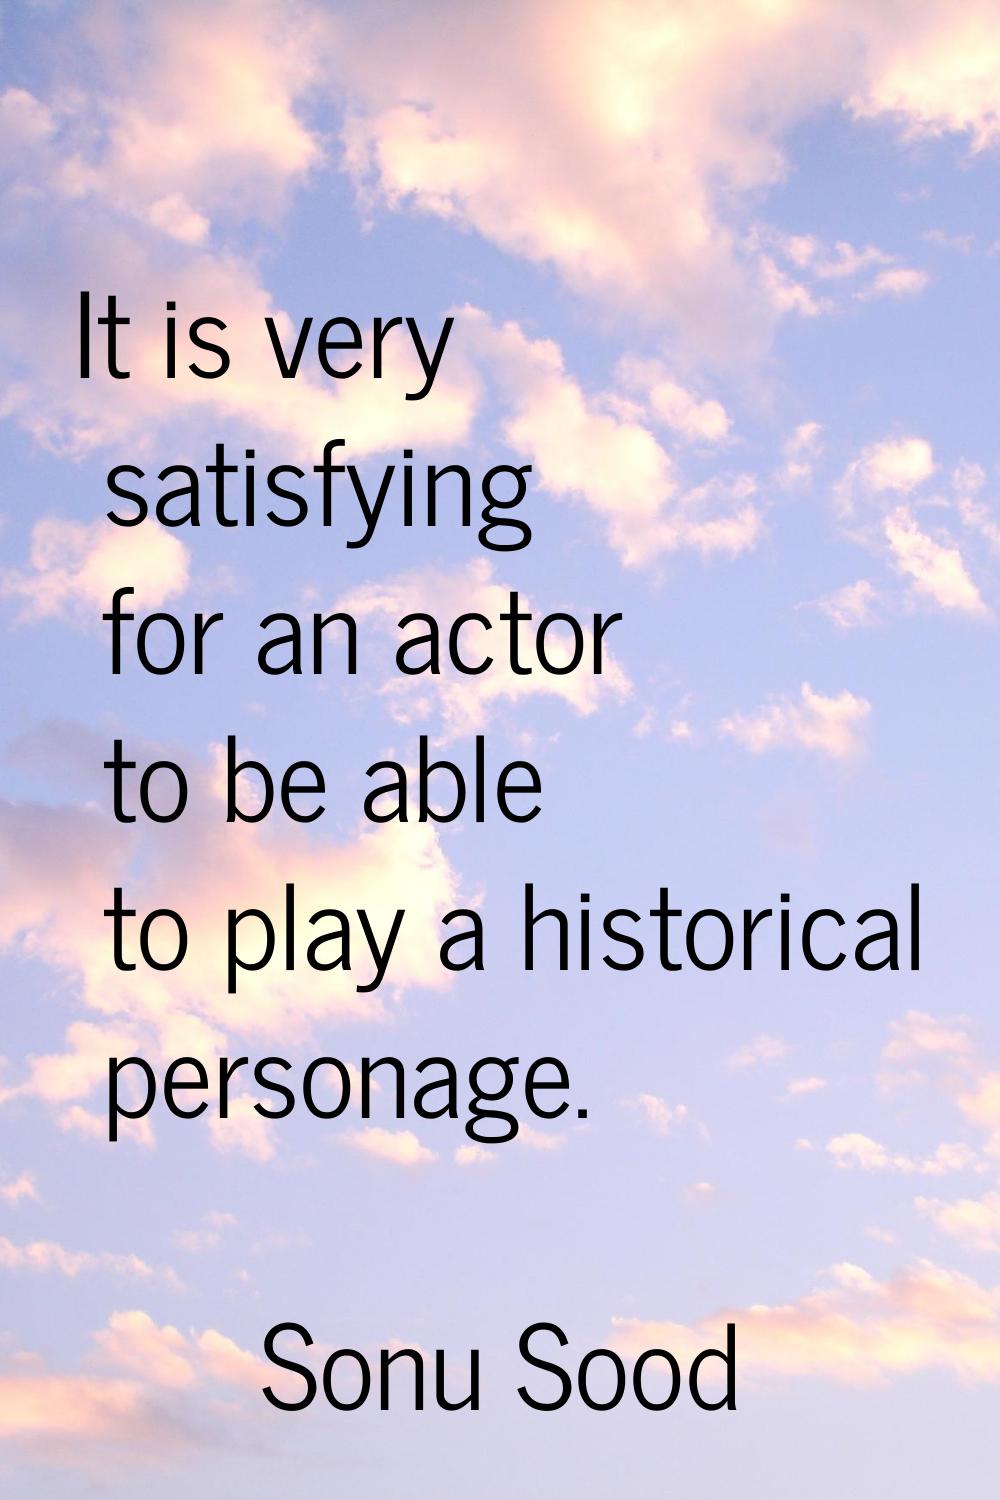 It is very satisfying for an actor to be able to play a historical personage.